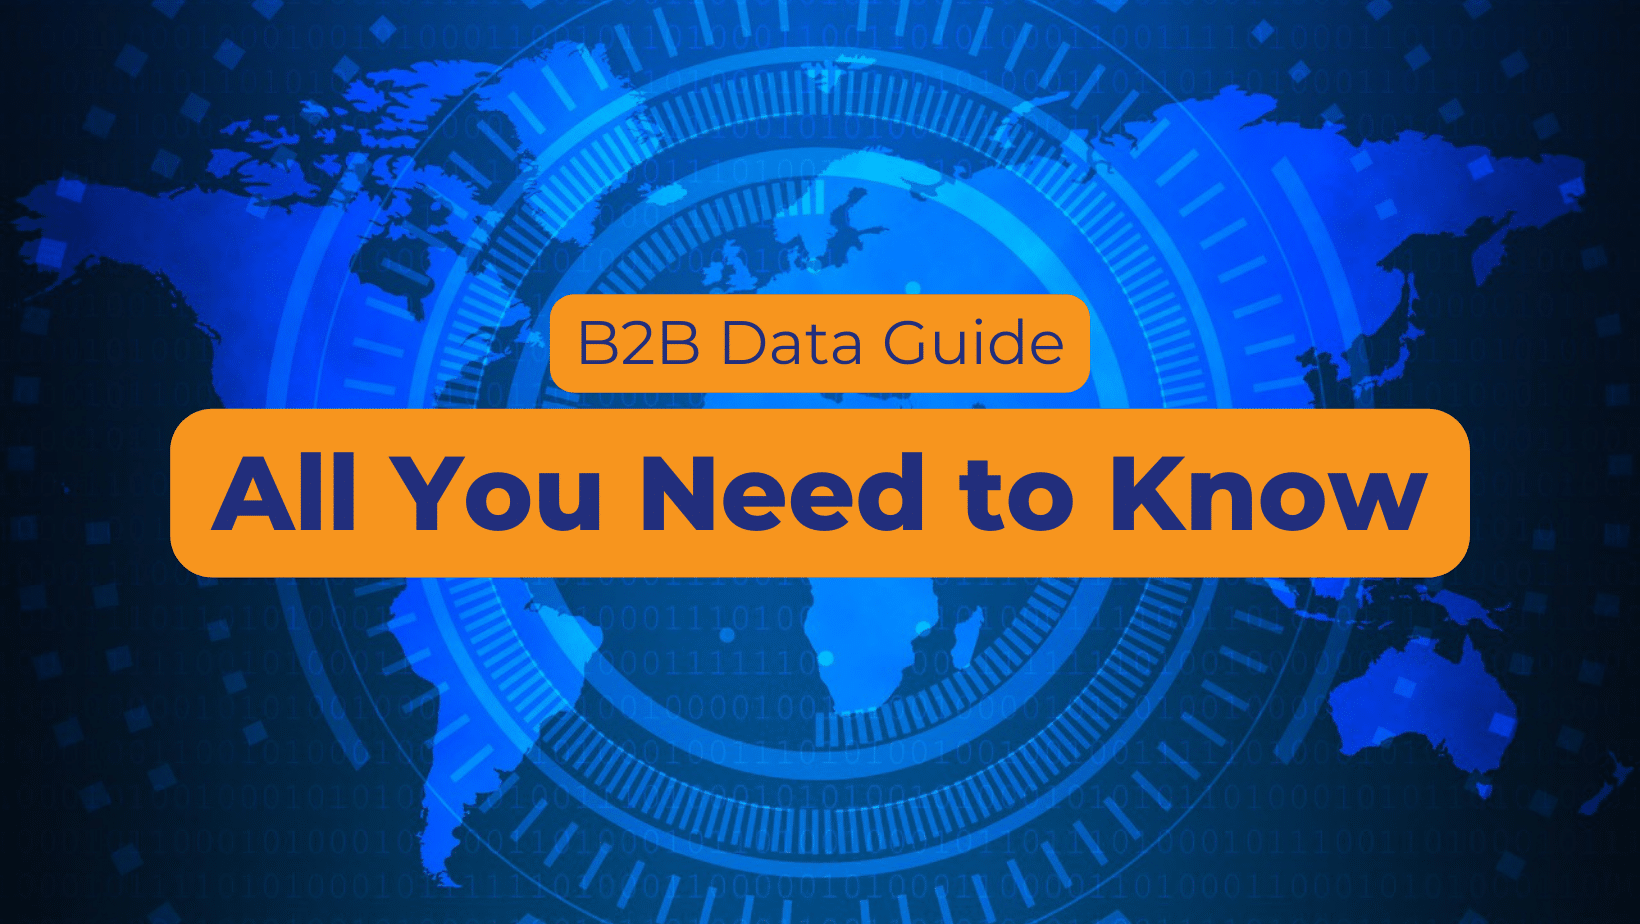 B2B Data Guide: All You Need to Know